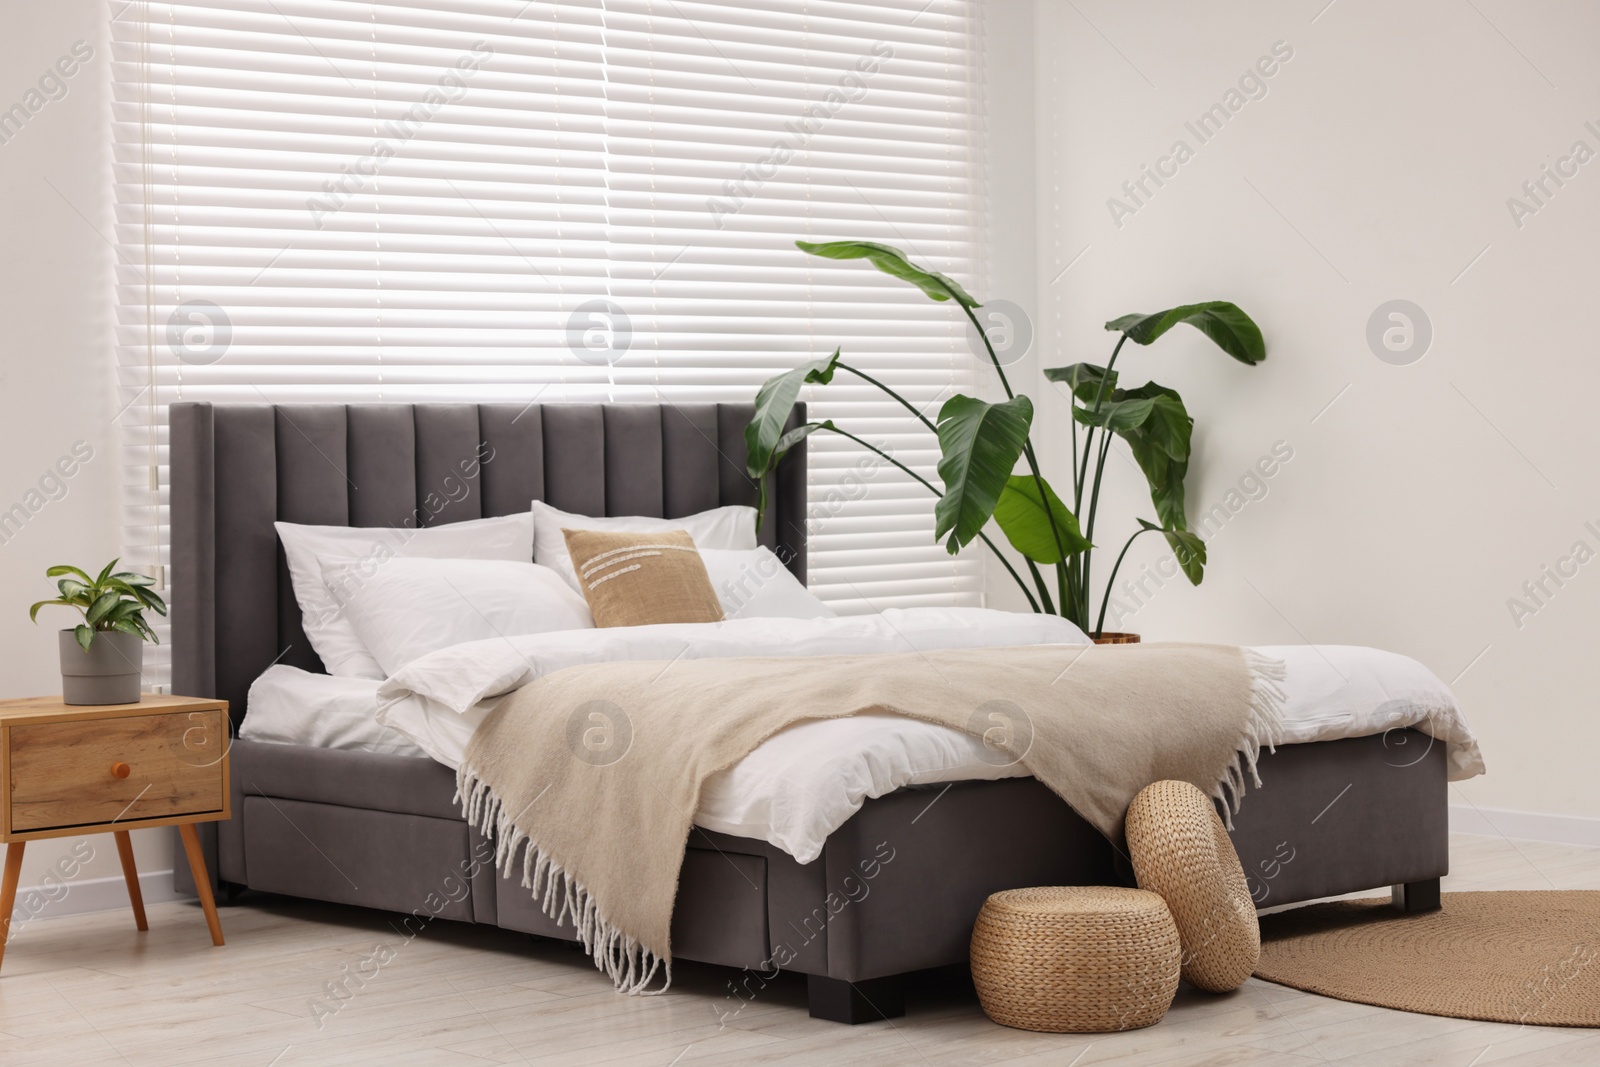 Photo of Large bed and houseplants in stylish bedroom. Interior design